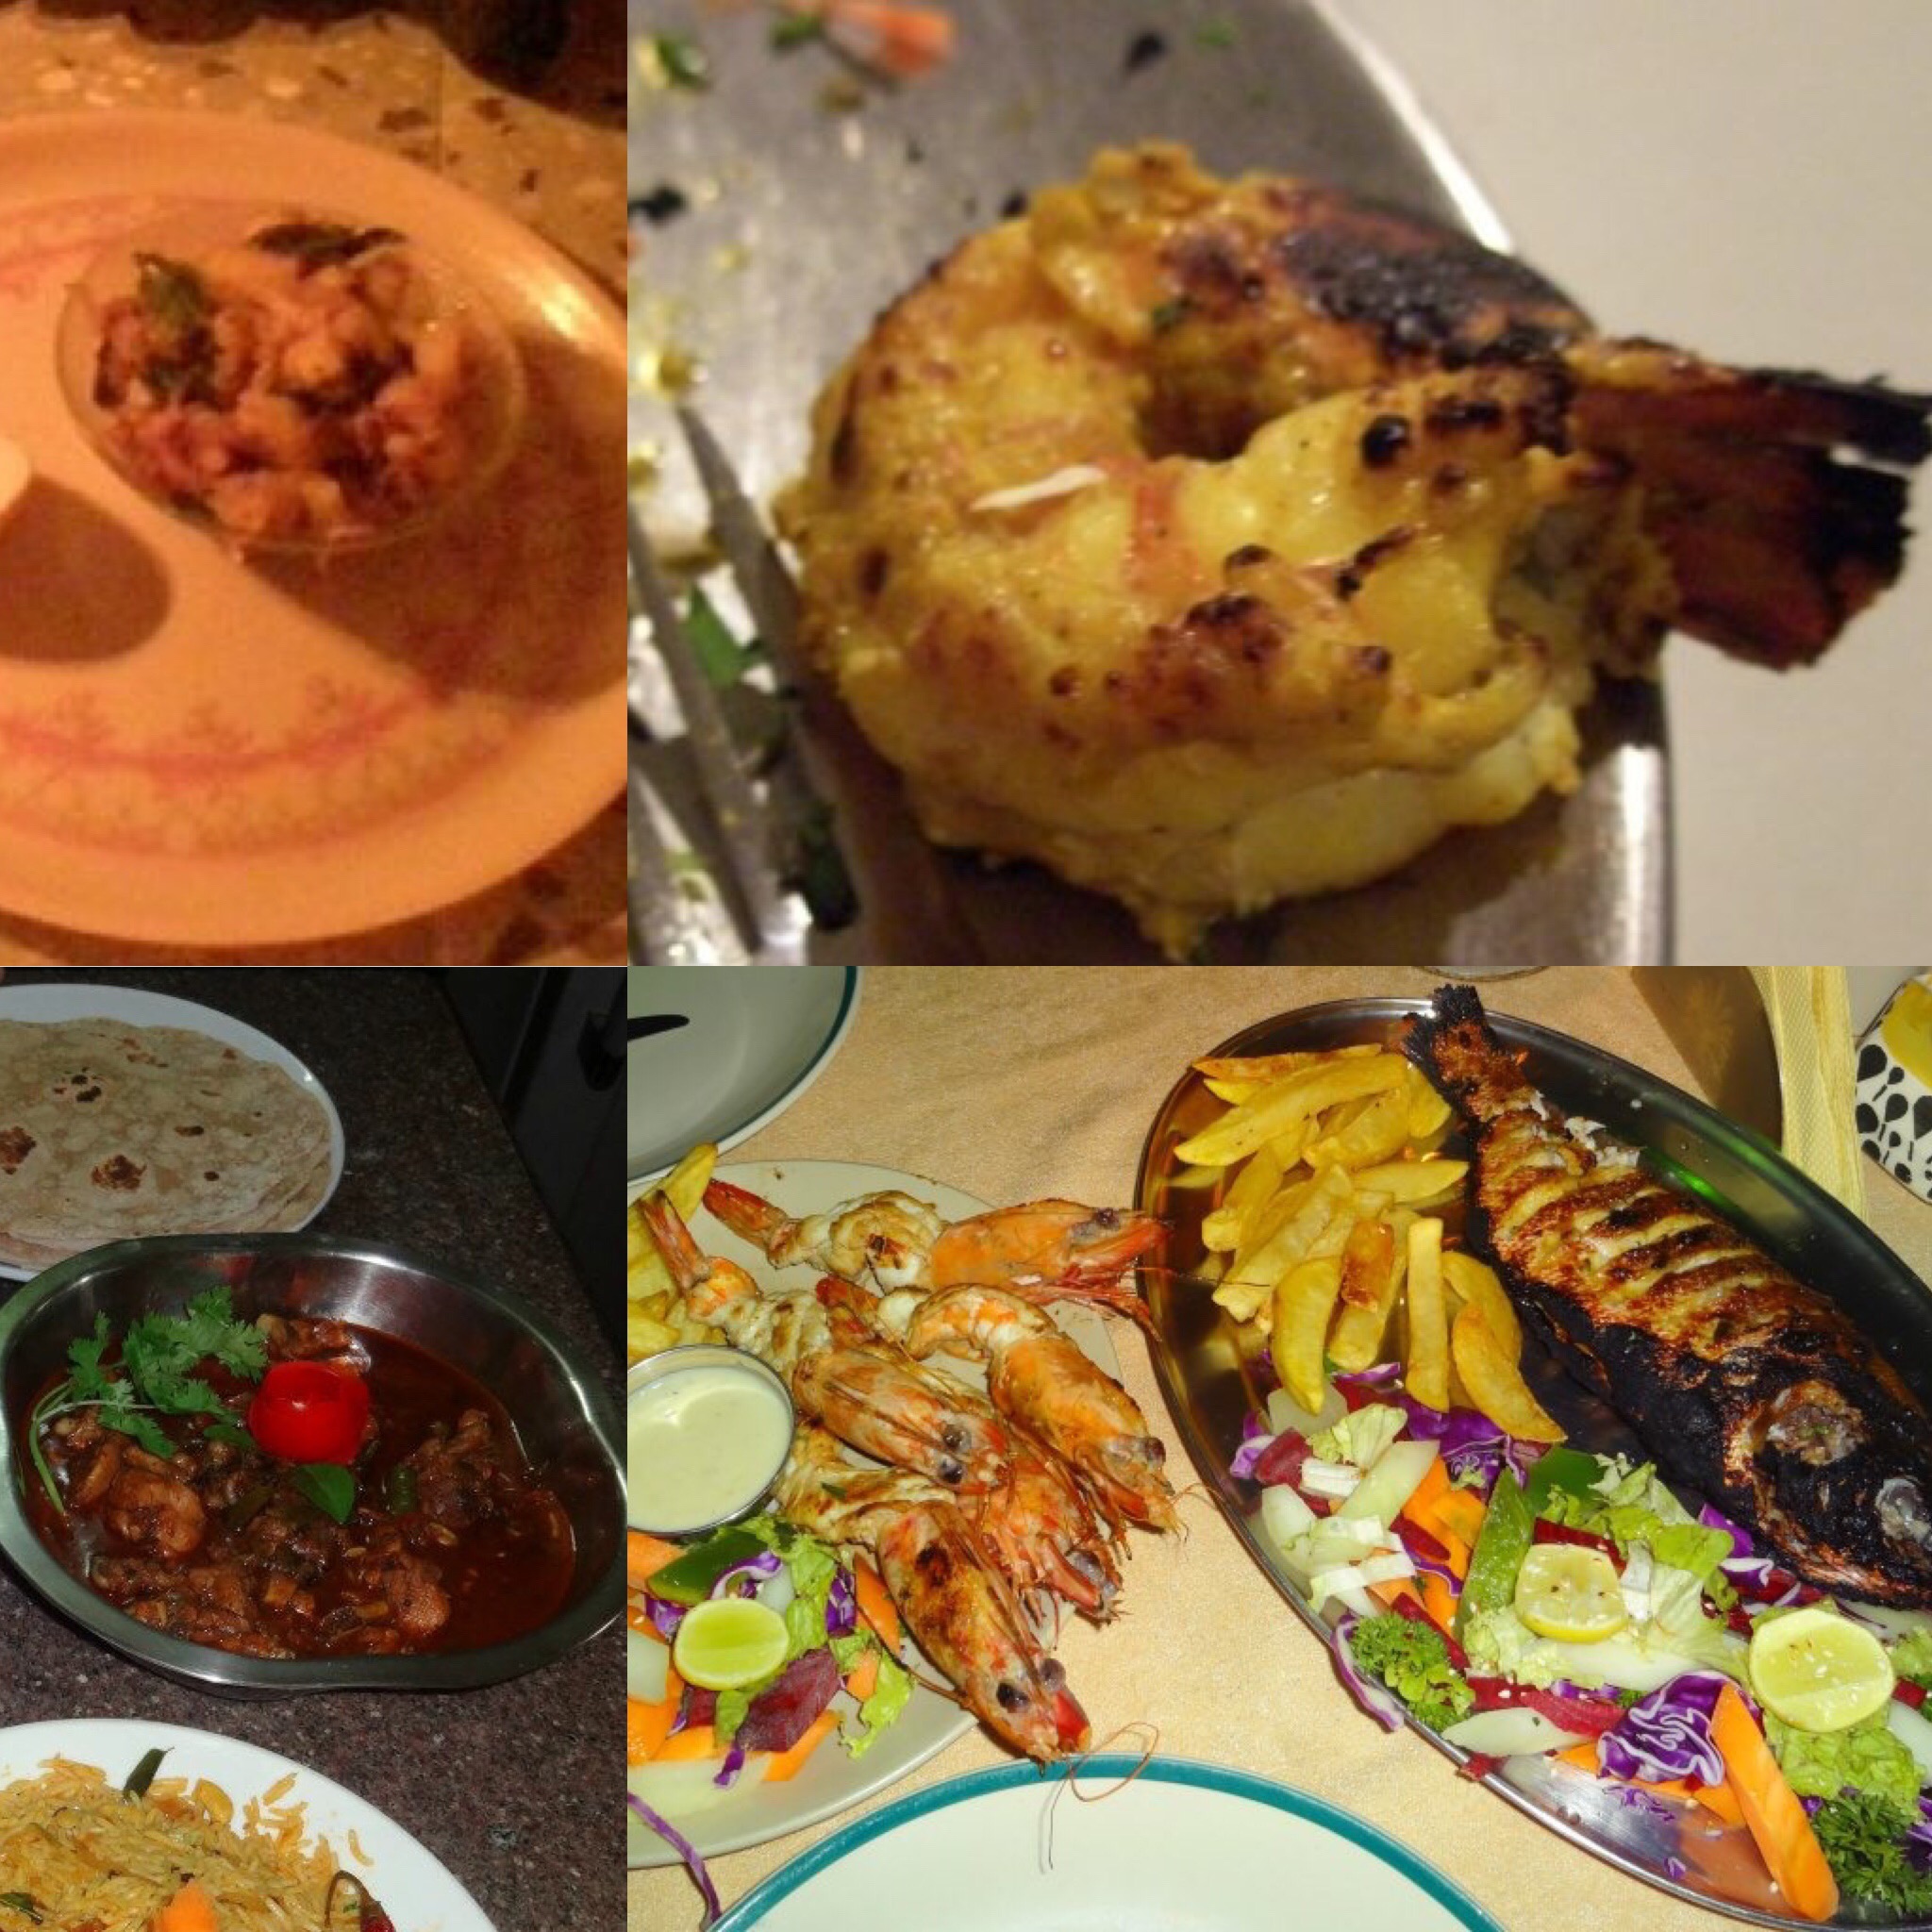 4 pictures of Indian food, including grilled prawns, grilled fish, chapati, rice and salad